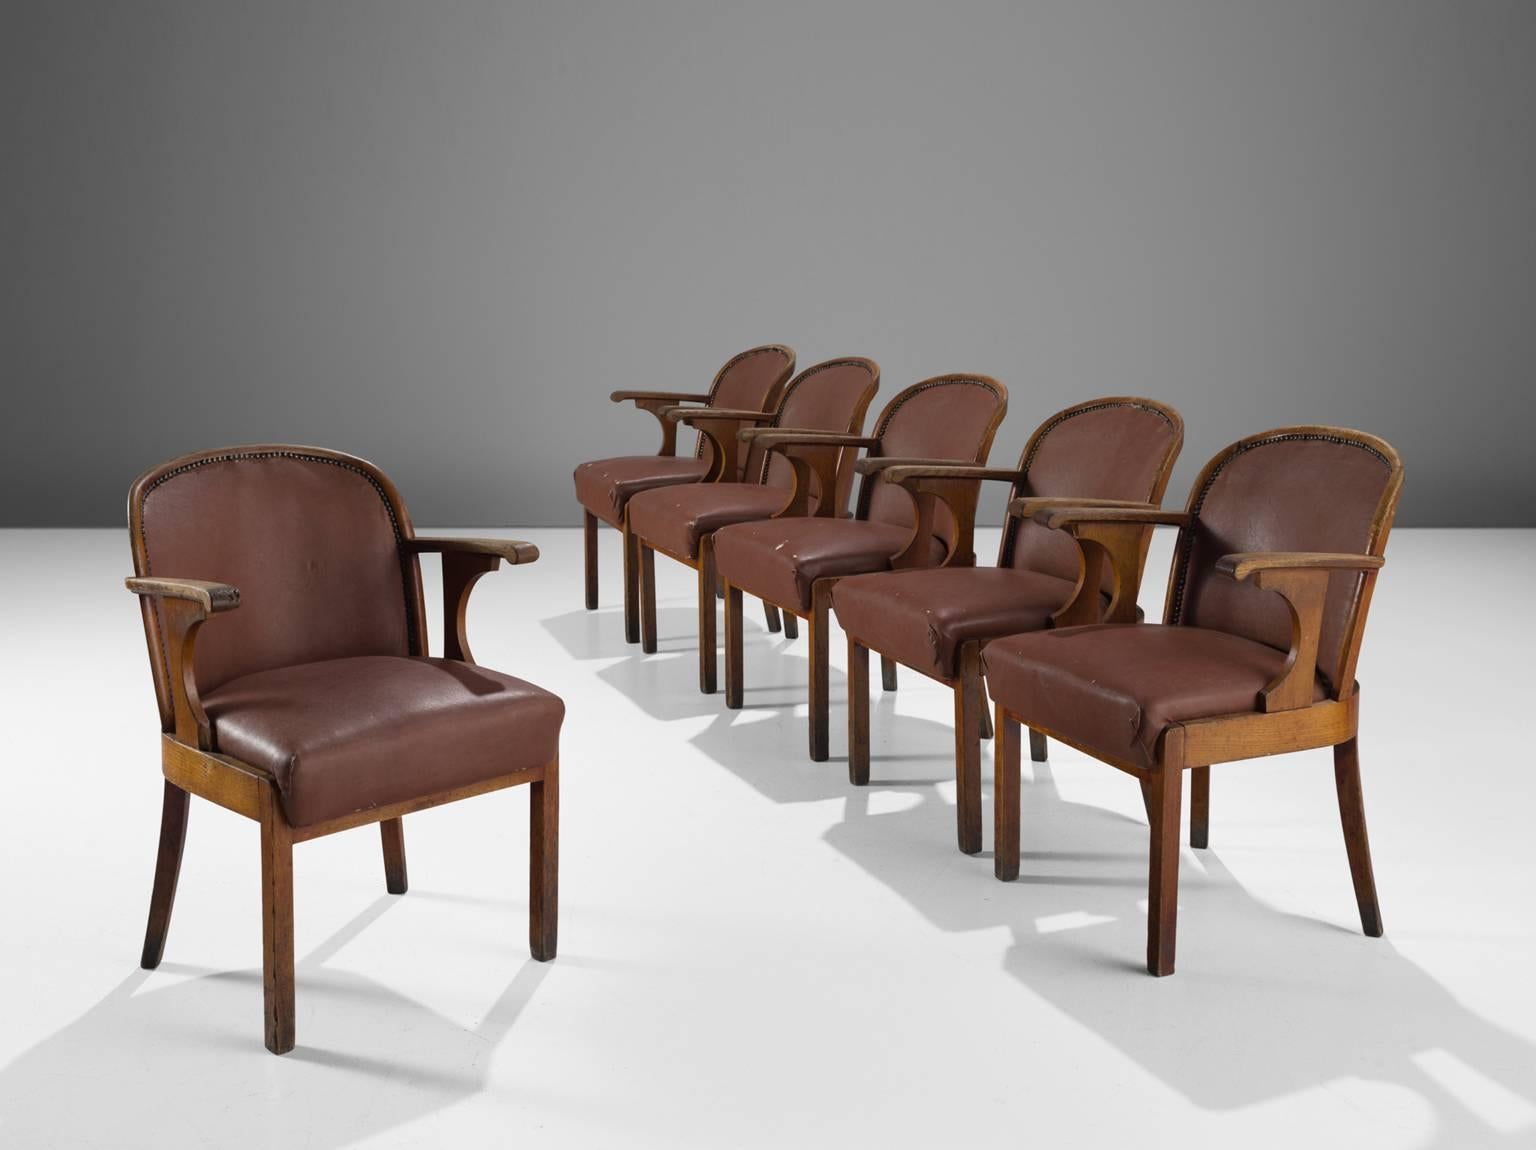 Set of six chairs, in oak and brown faux leather, Sweden, 1940s. 

This set of six dining chairs with original leather upholstery is made by a Swedish cabinetmaker. The chairs have a solid oak frame, tapered legs, of which the back ones are slightly